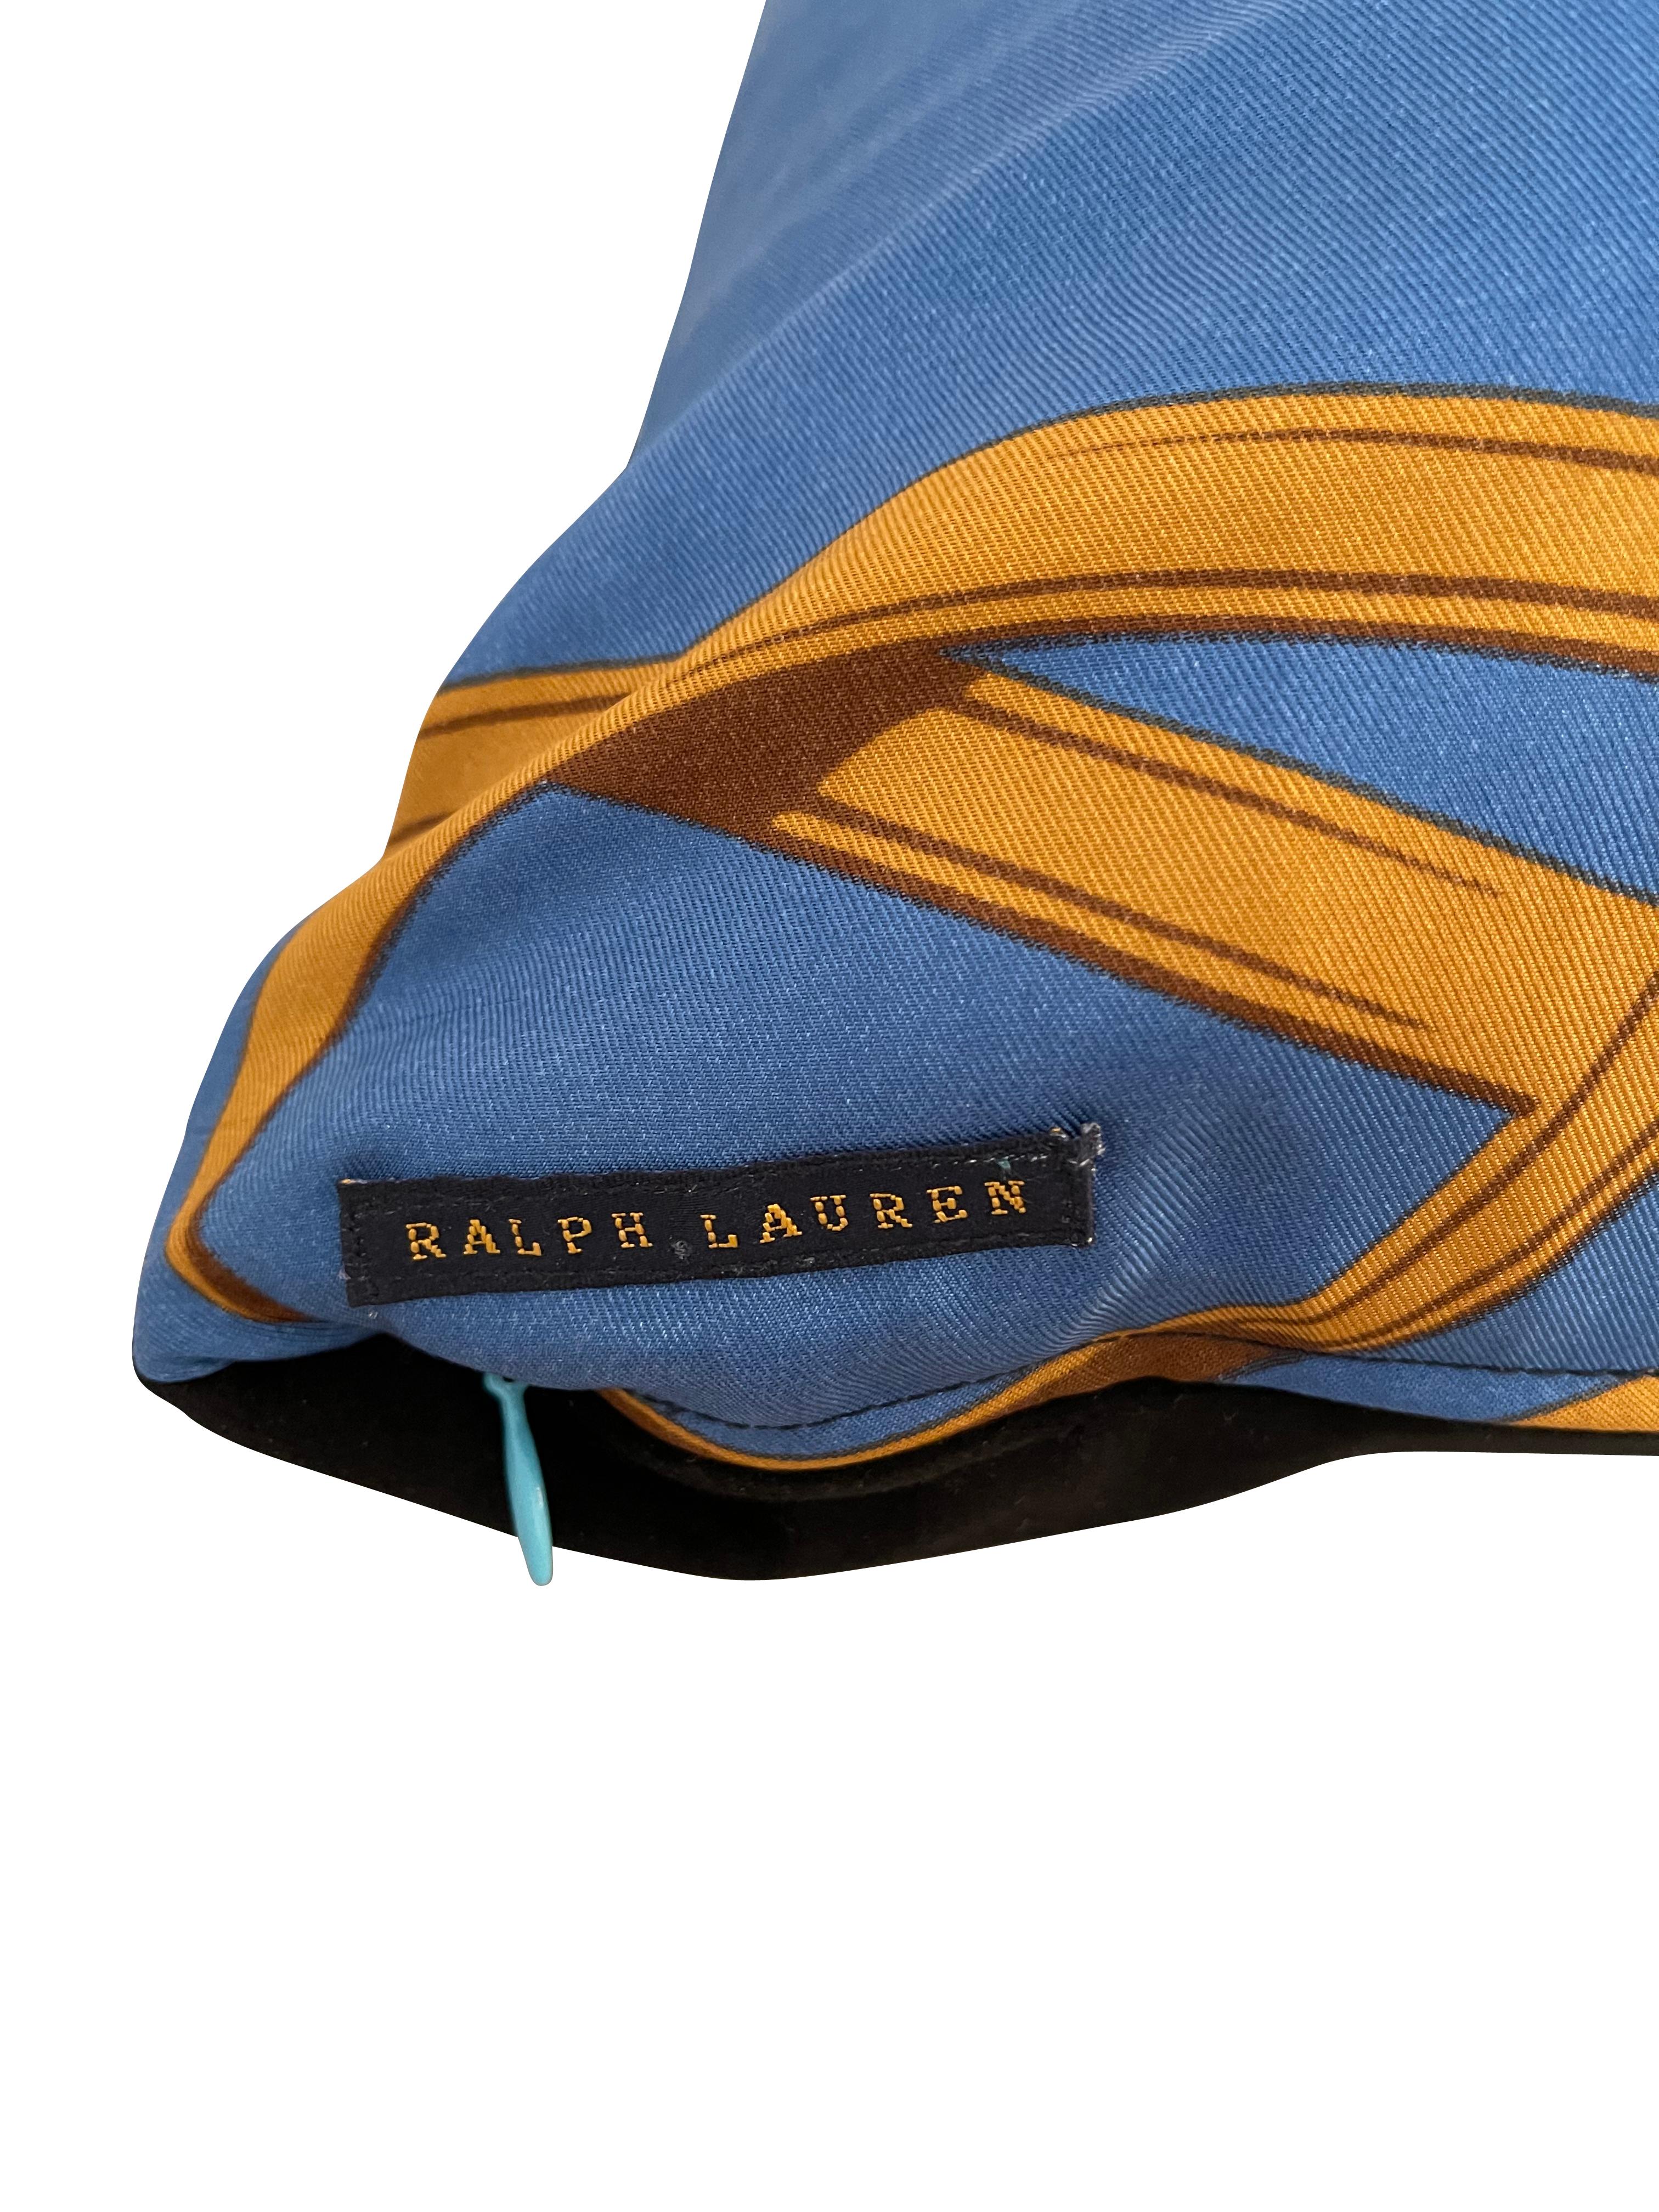 American Ralph Lauren Vintage Blue and Yellow Silk Polo Pillow